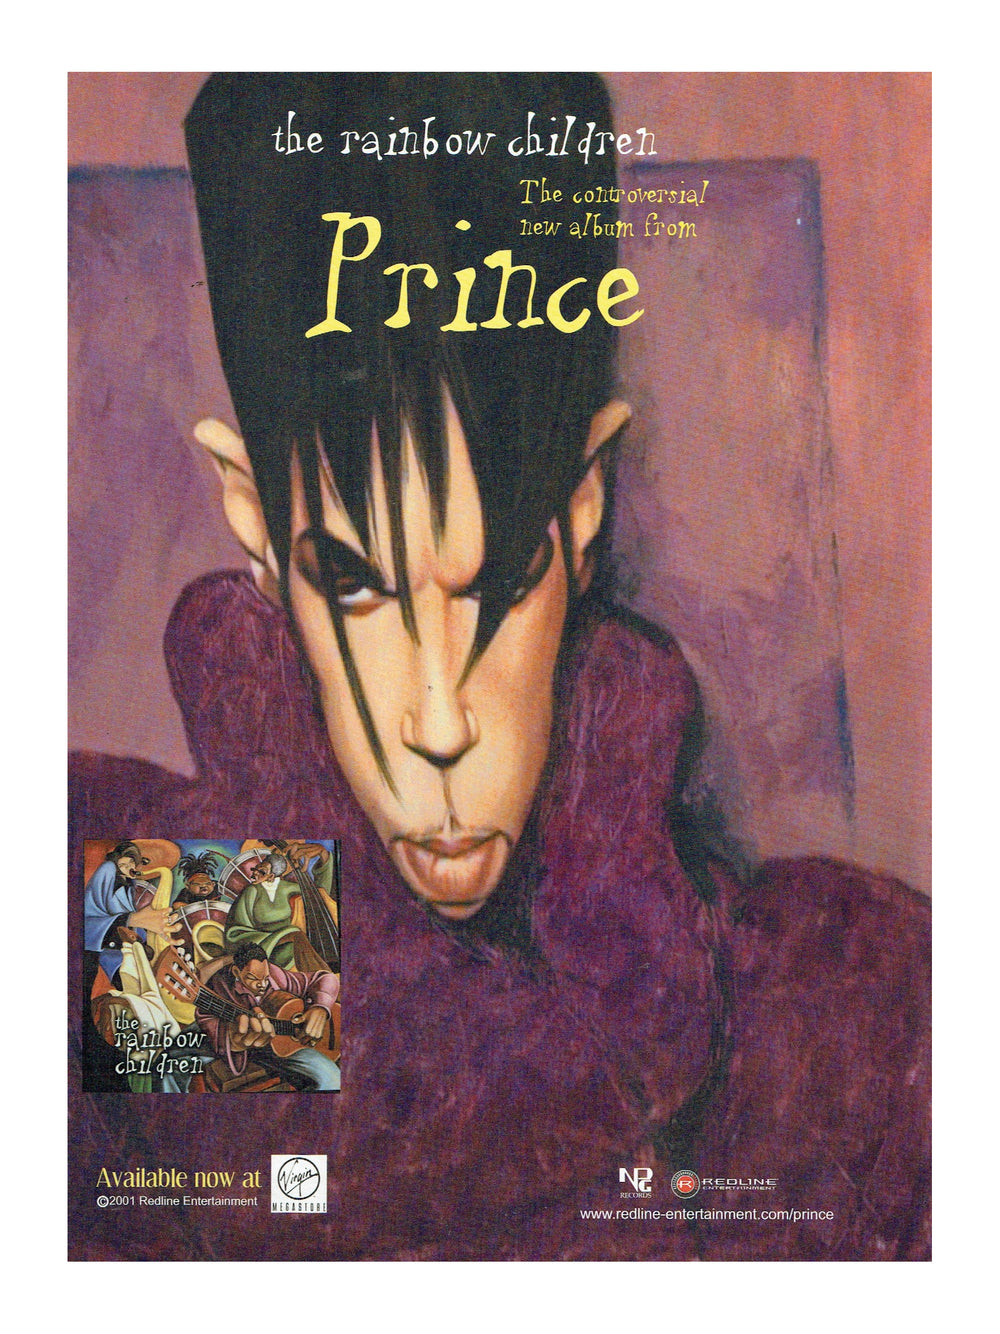 Prince – The Rainbow Children NPG Records Official Trade Magazine Advert Ideal For Framing